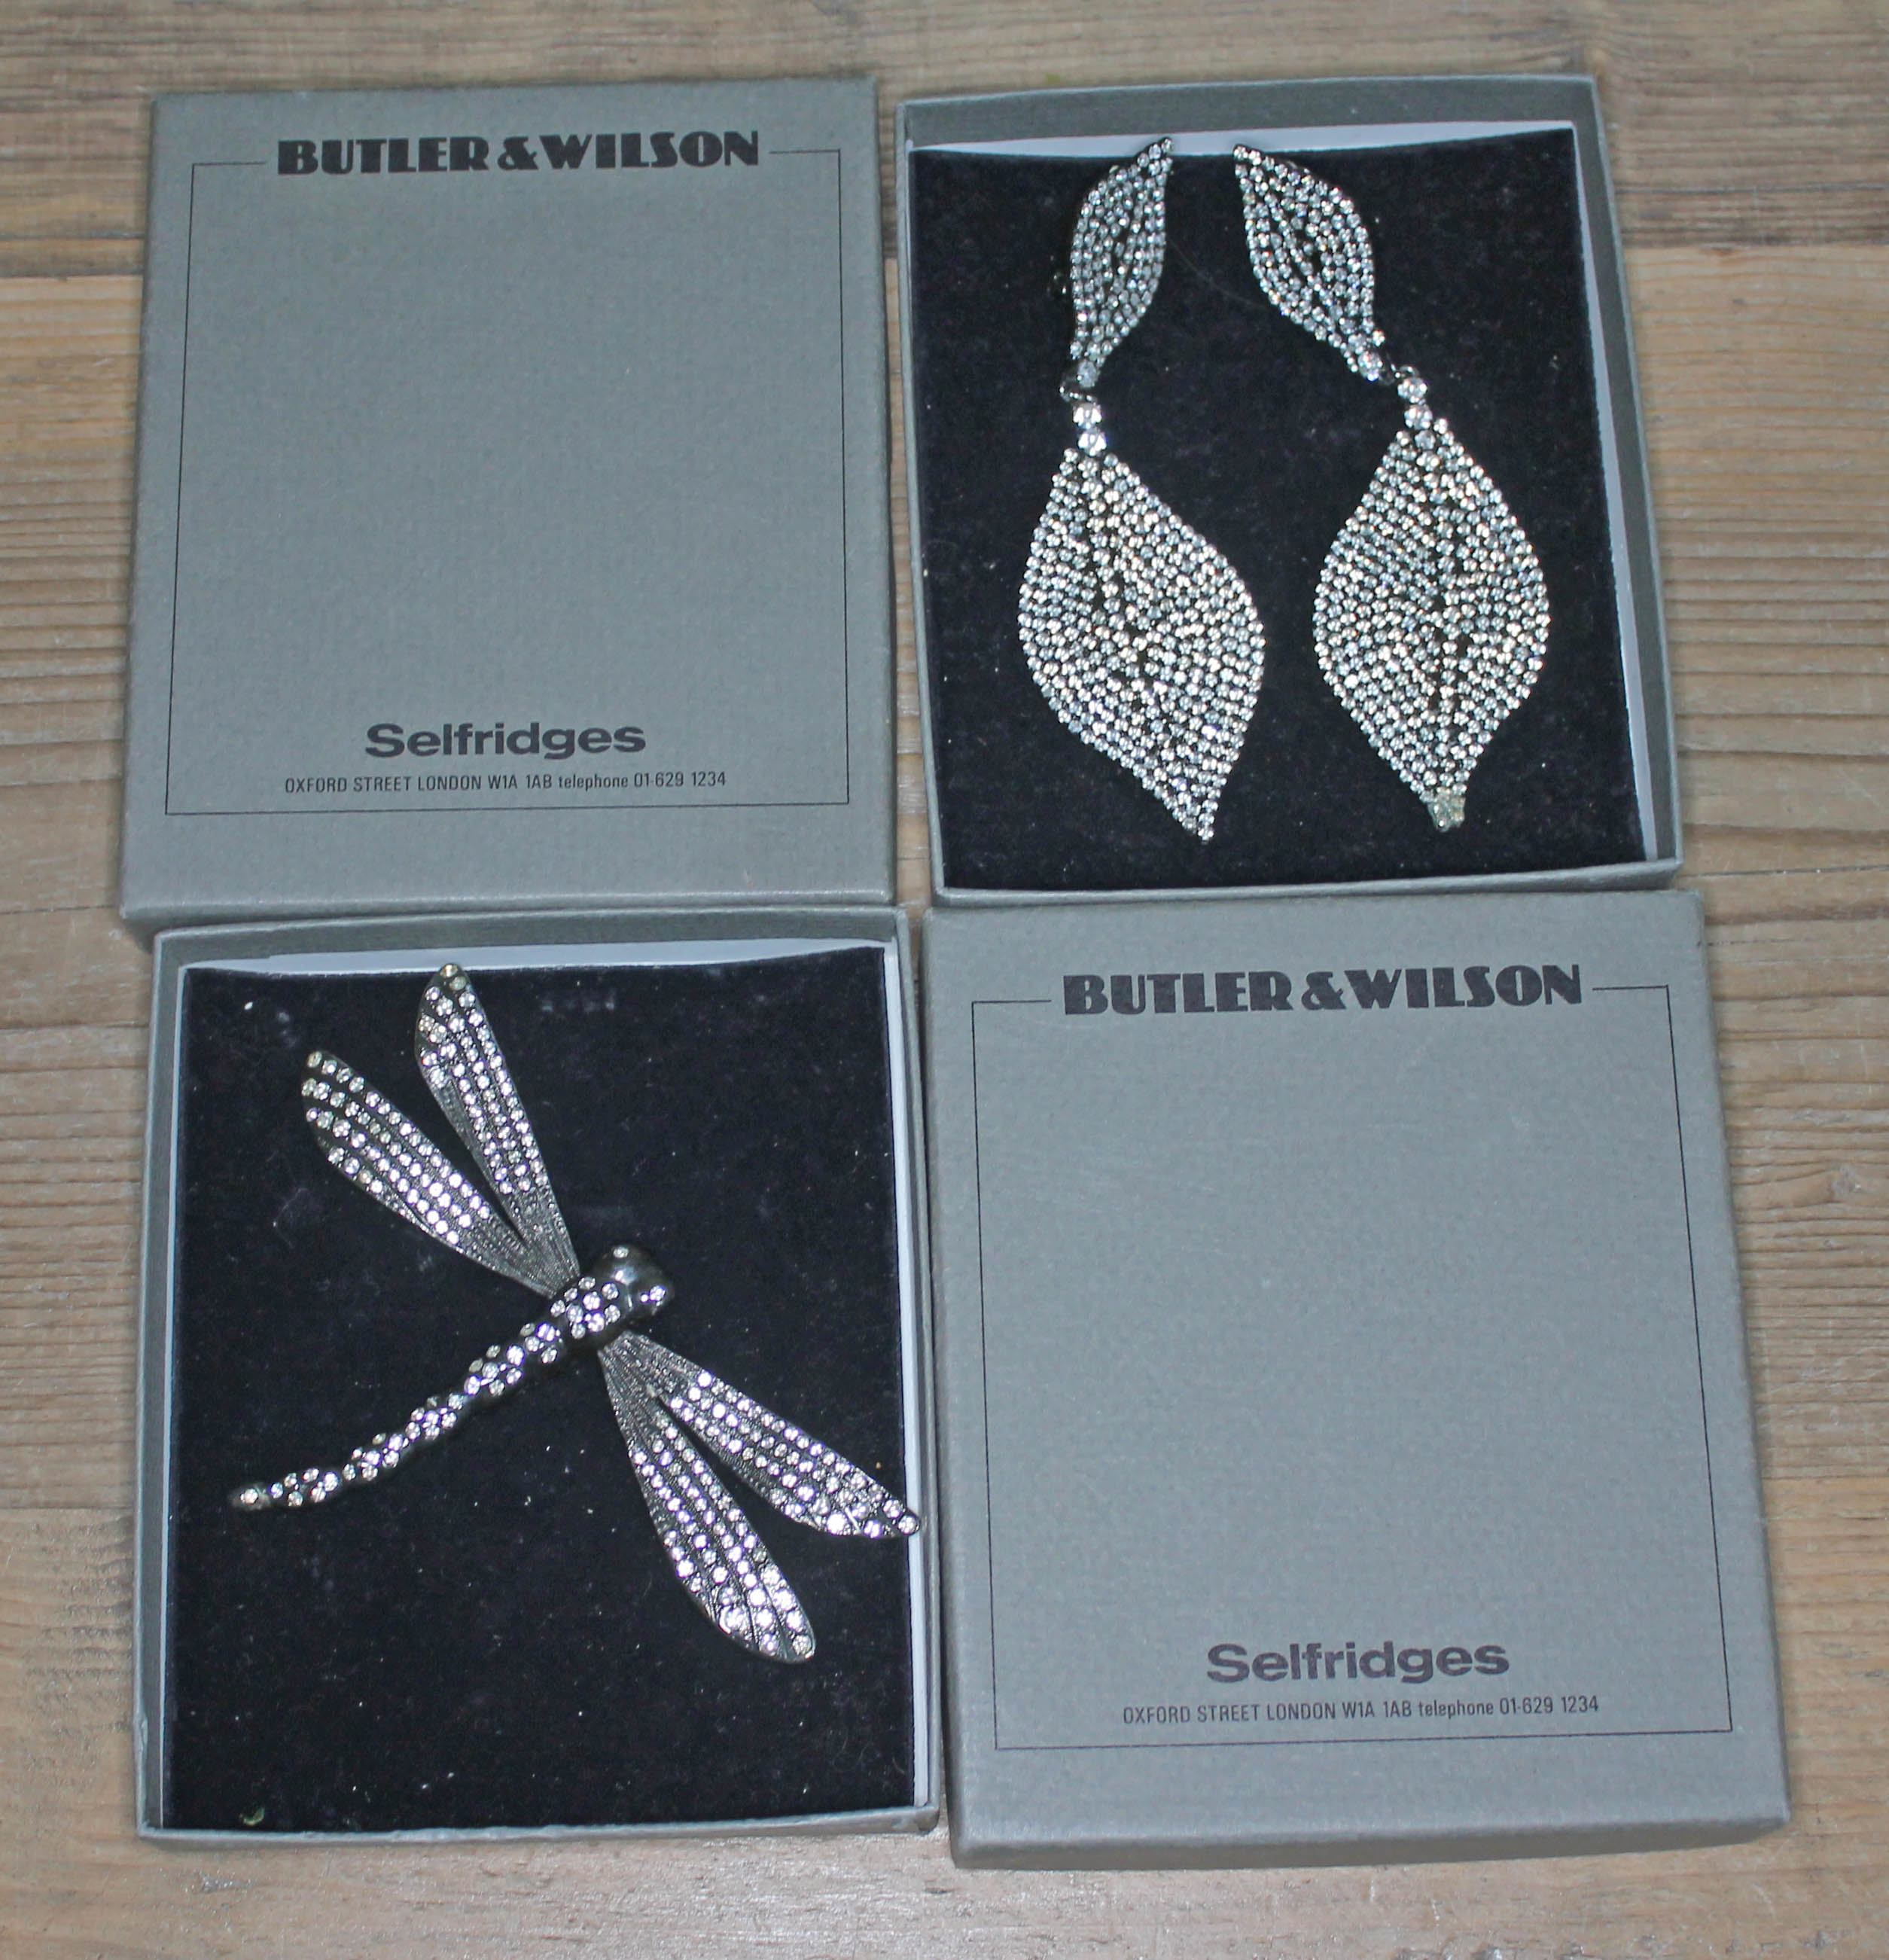 Butler & Wilson costume jewellery comprising a pair of drop earrings and a butterfly brooch, both